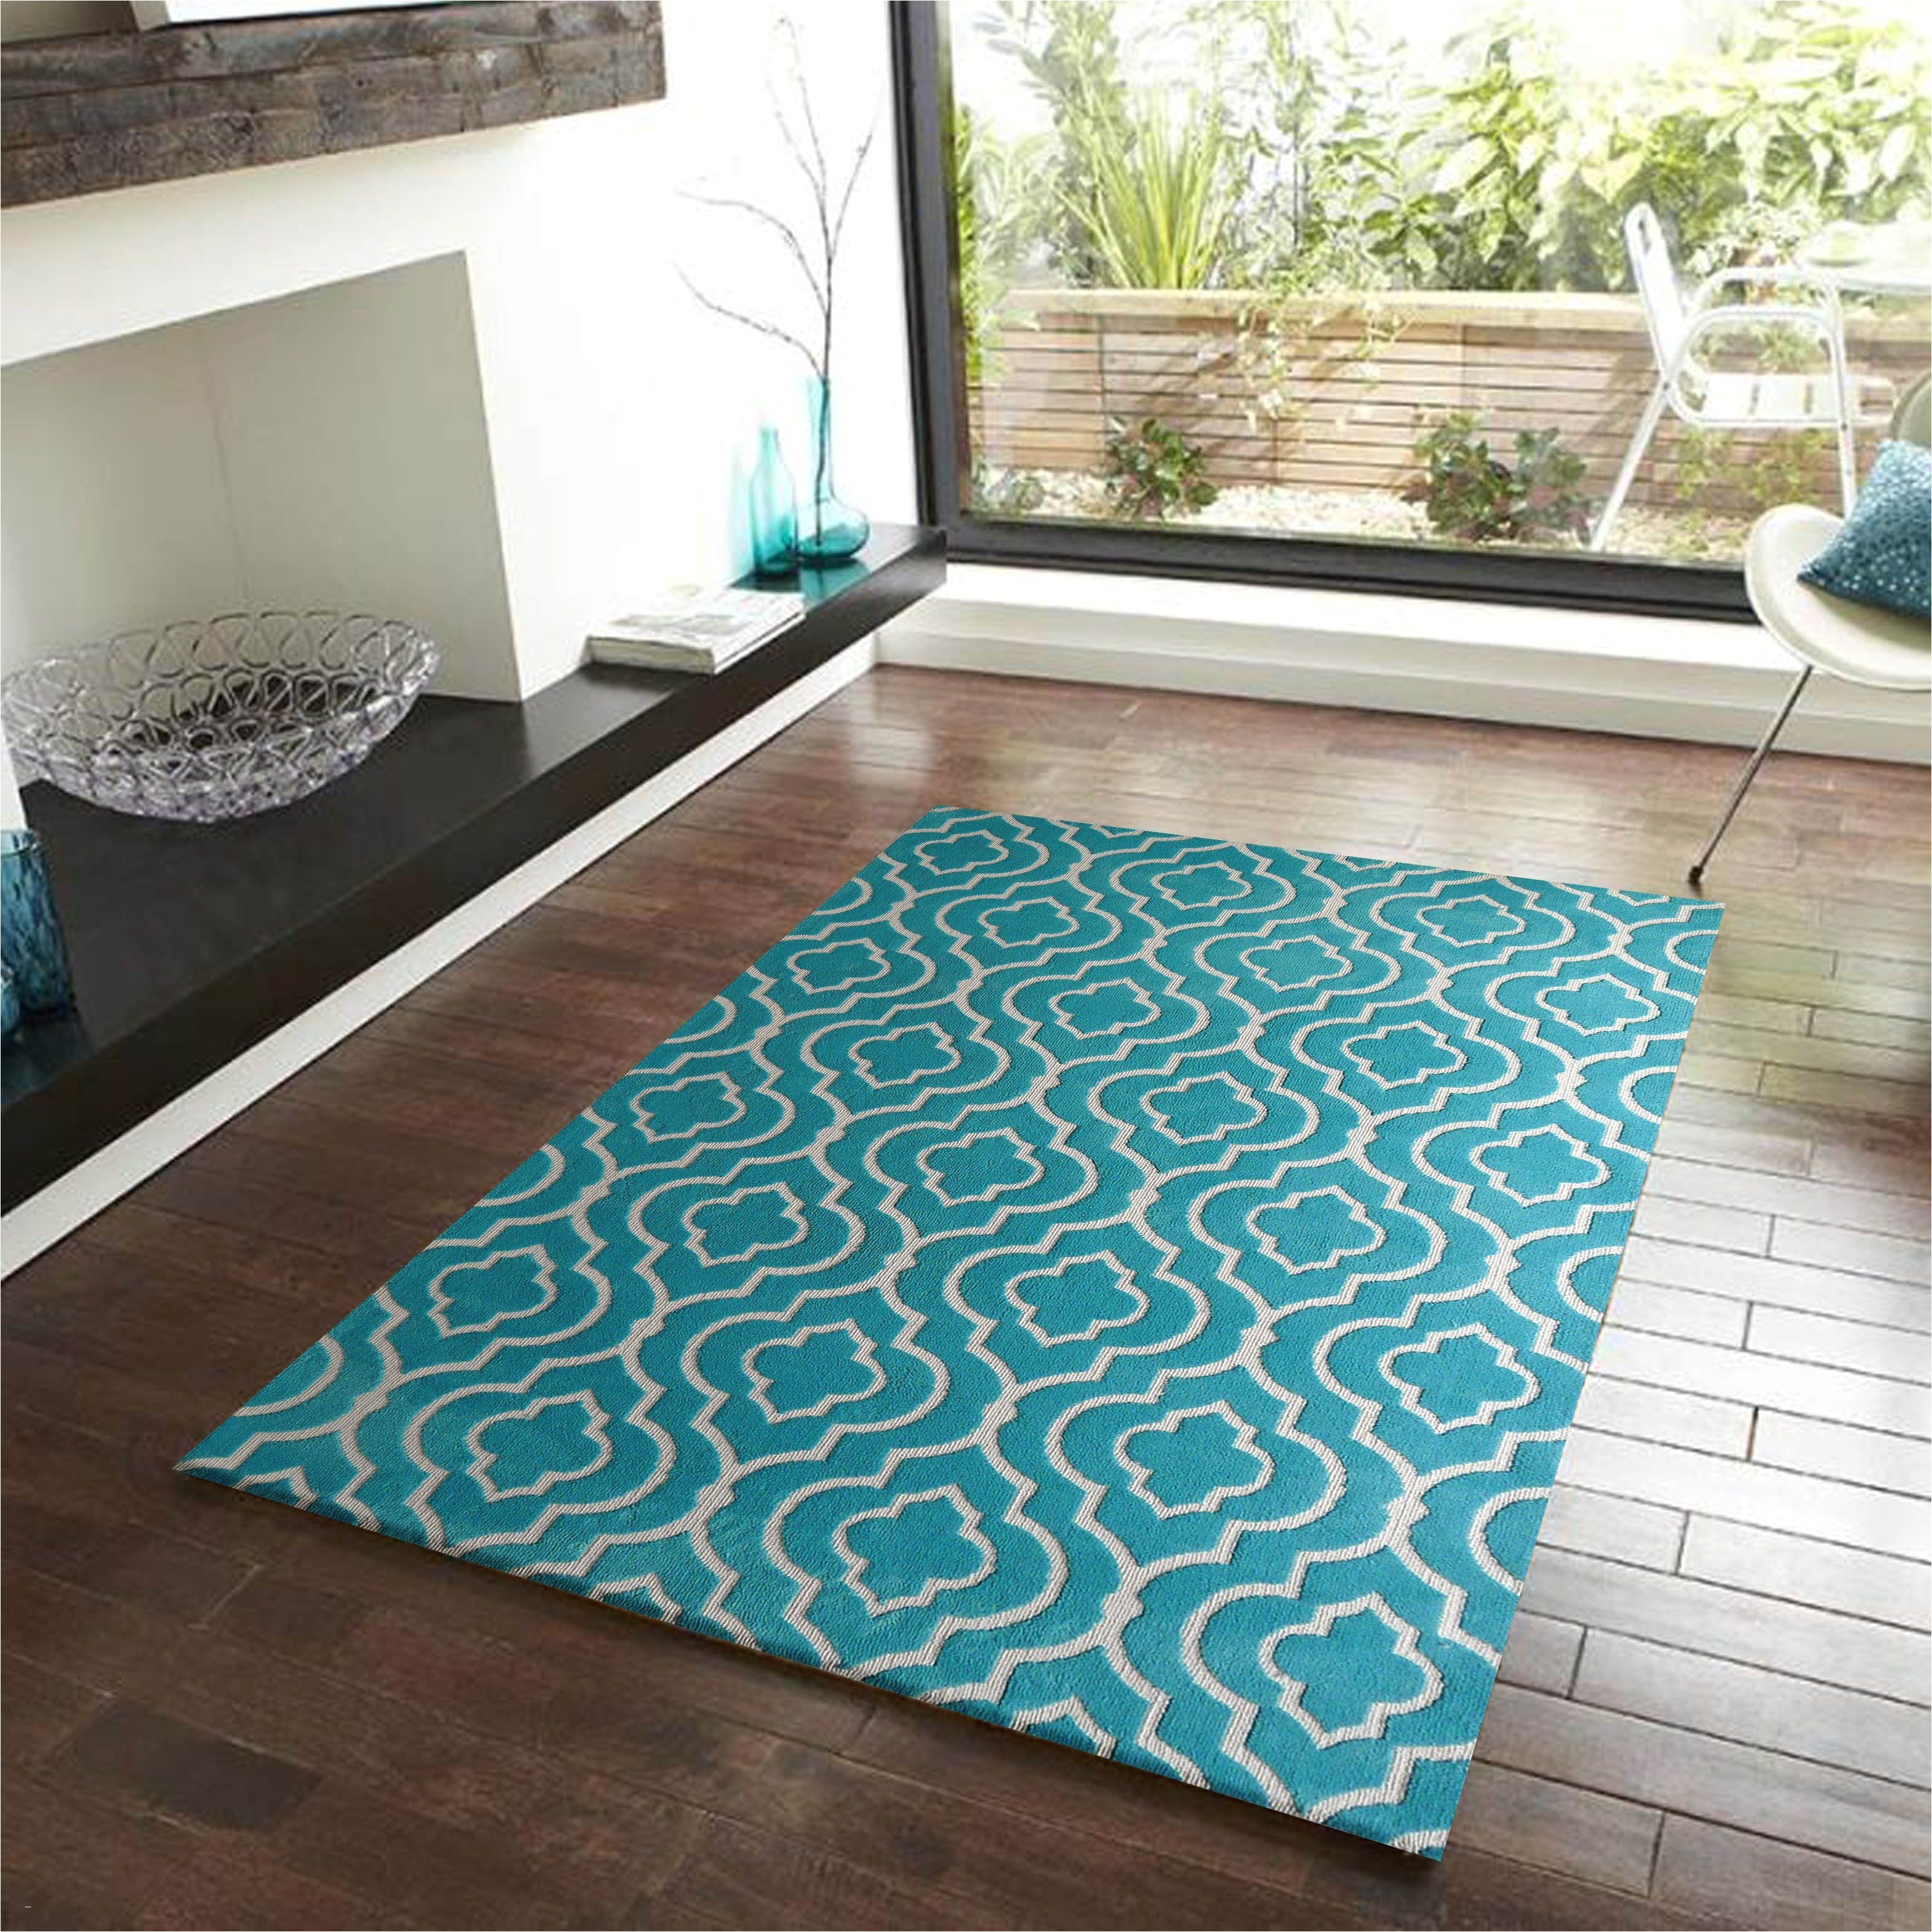 multi colored outdoor rugs elegant 41 awesome bright colored outdoor rugs affects your life outdoor